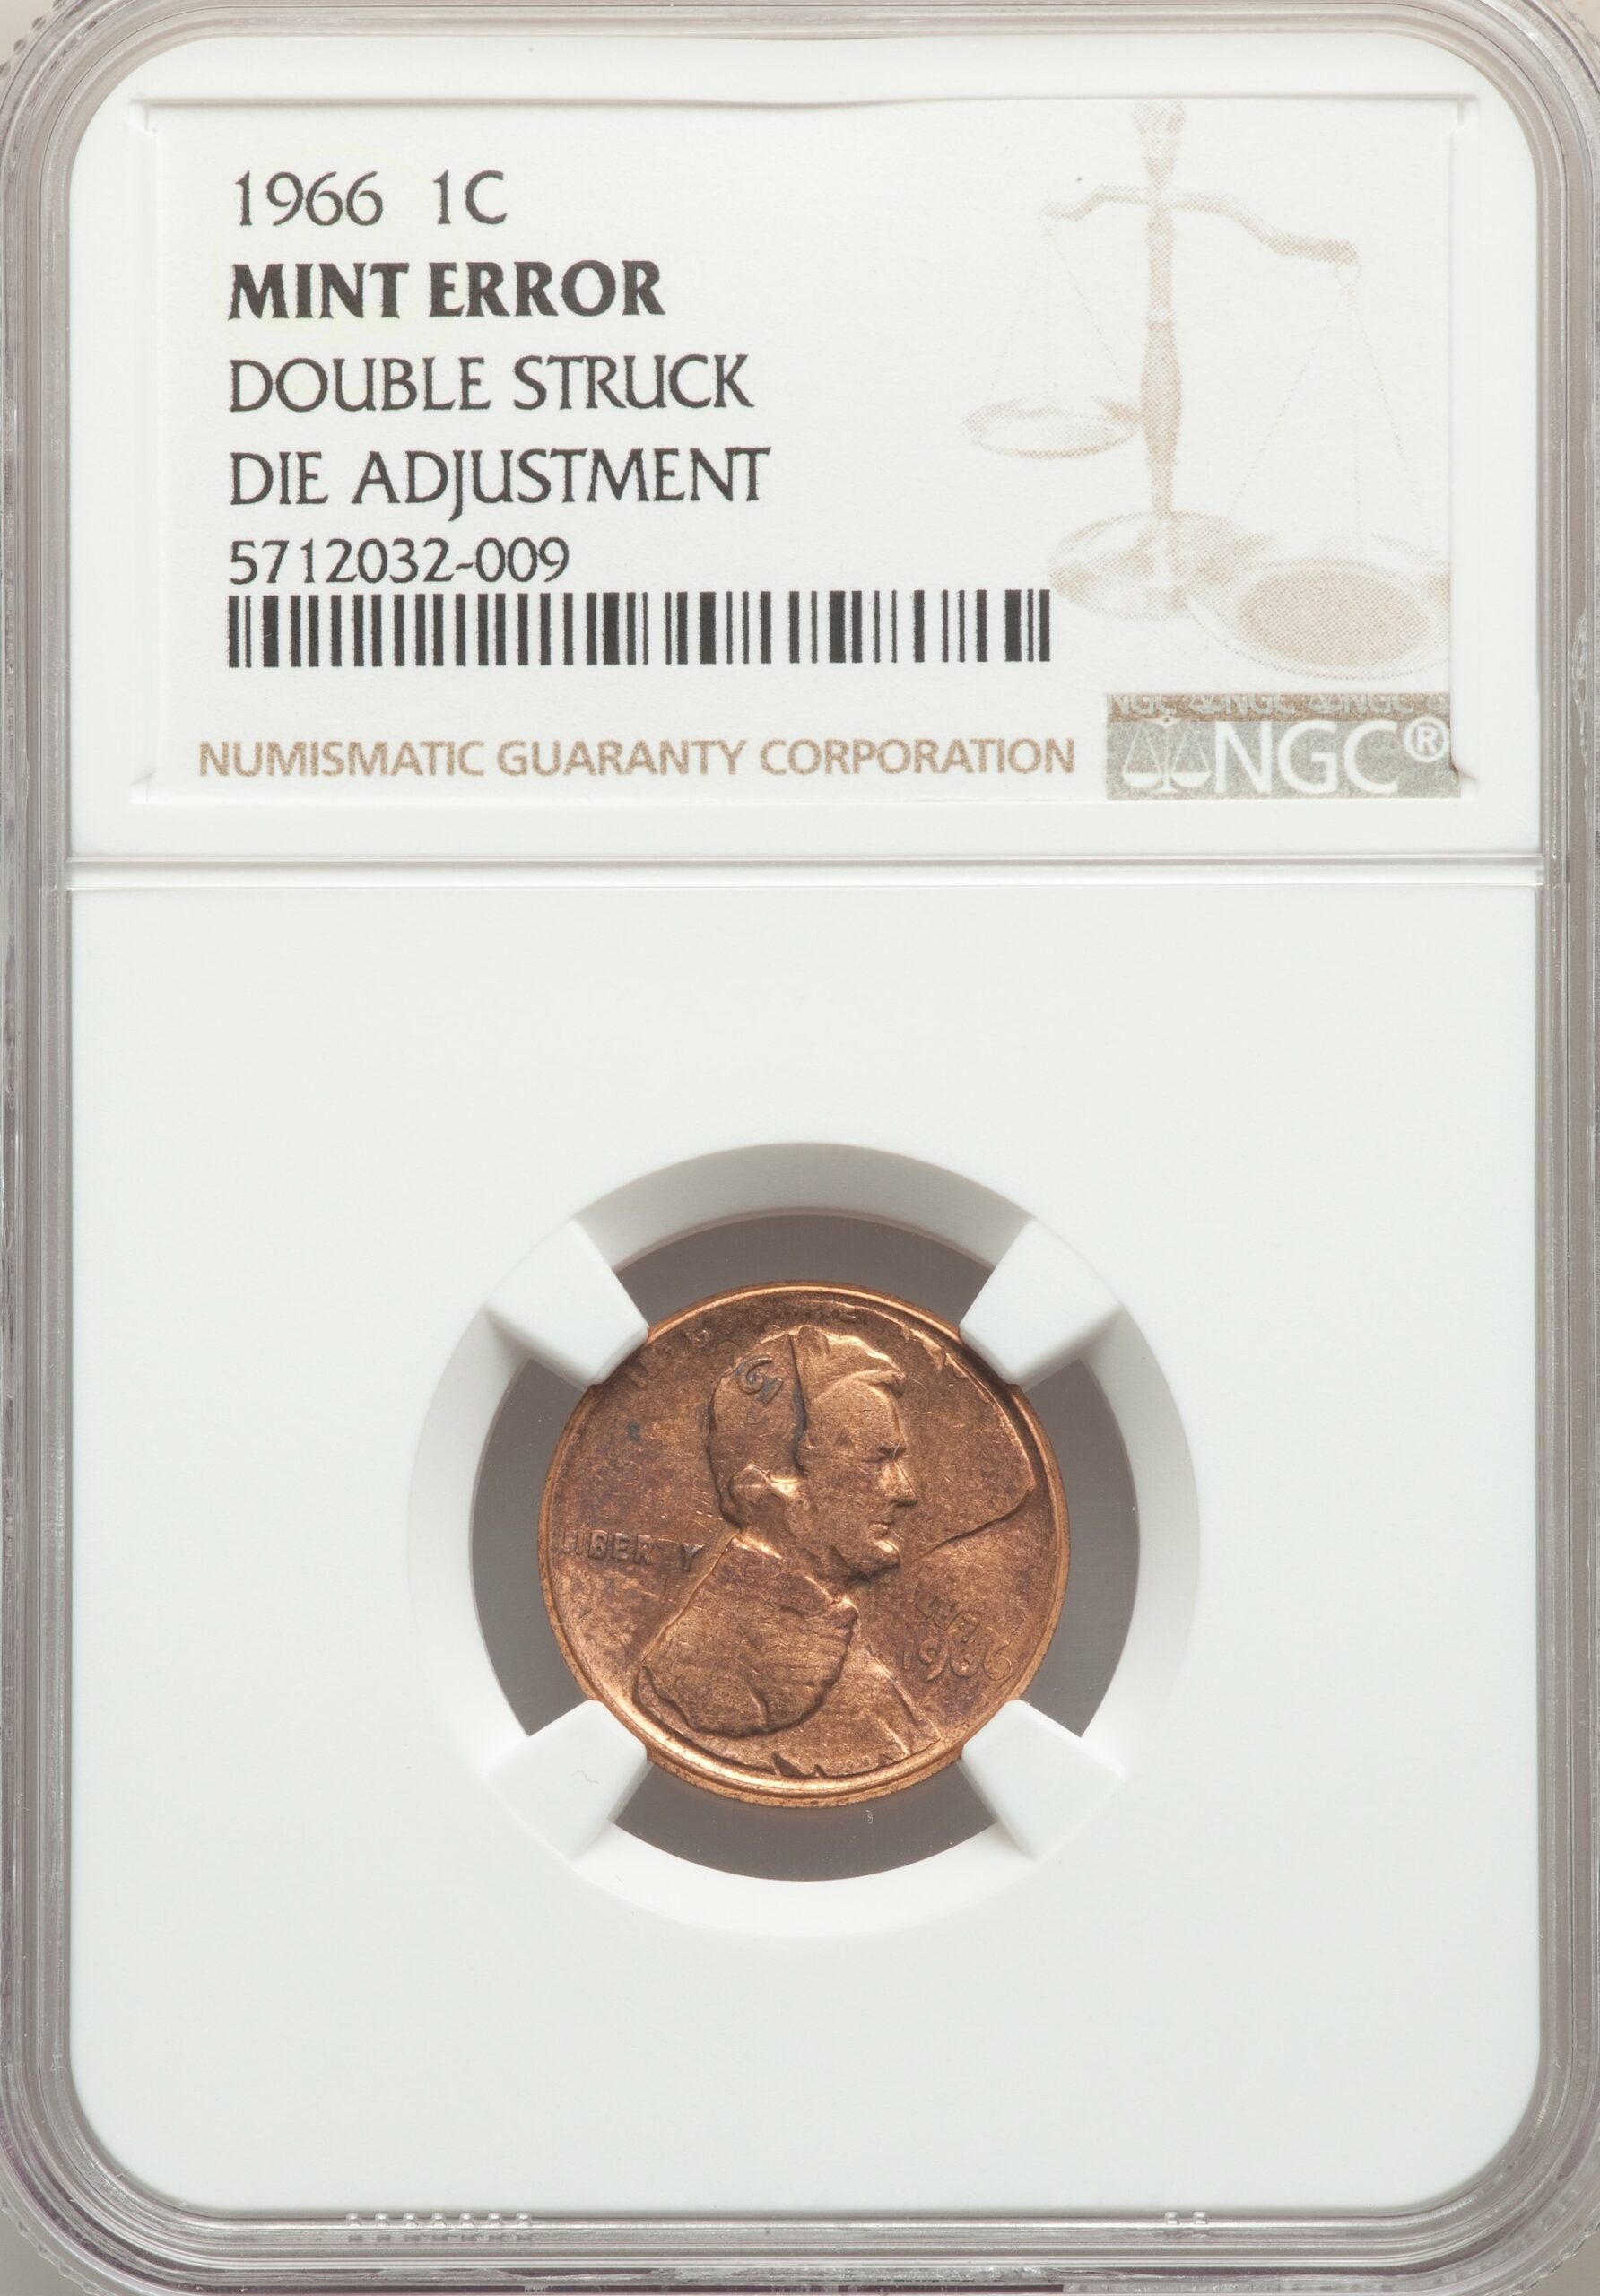 1966 Penny Double Struck and Die Adjustment